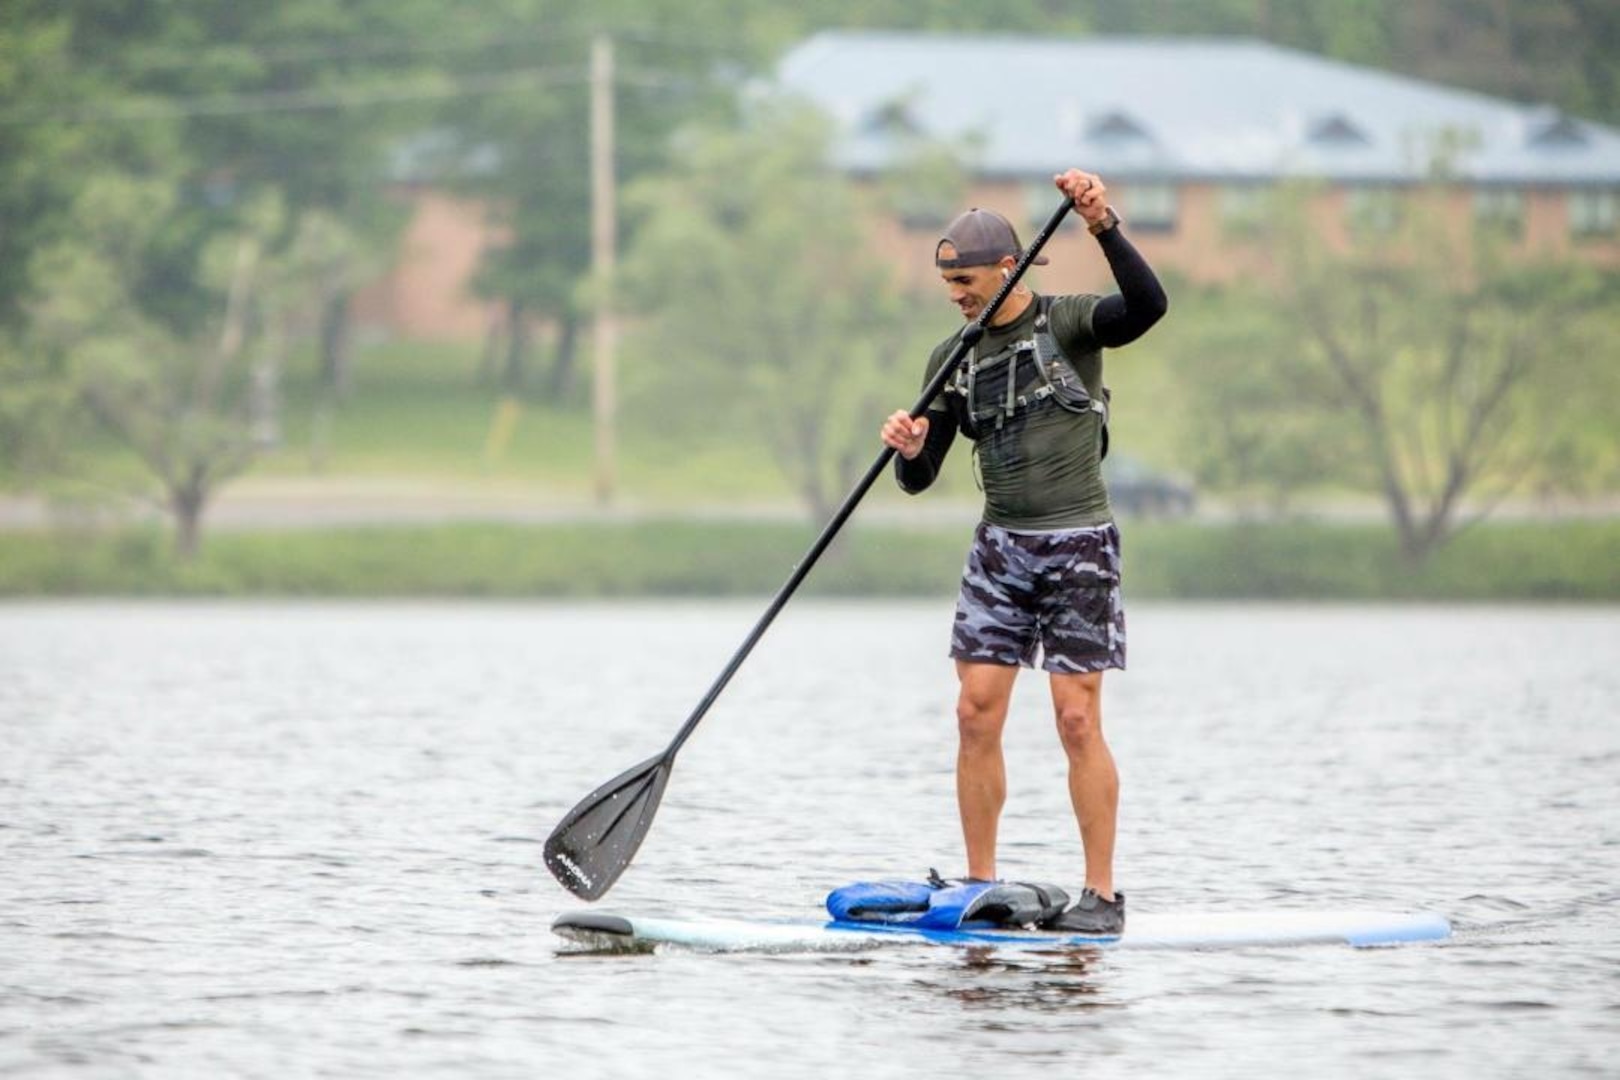 Sgt. 1st Class Mark Jones, infantryman, Army Mountain Warfare School, Vermont National Guard, practices paddle boarding for physical fitness training.